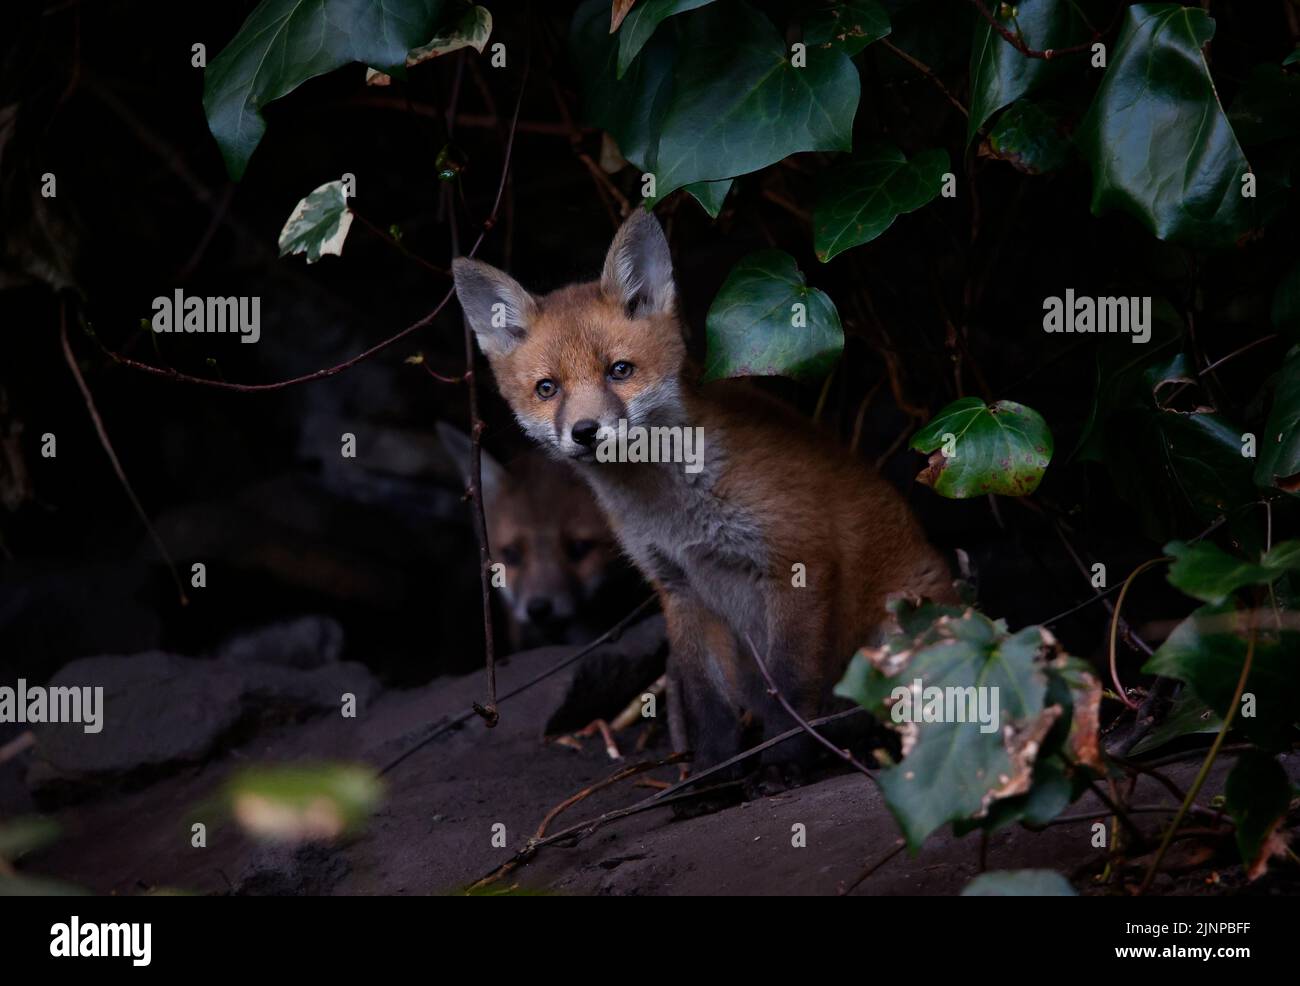 A family of urban fox cubs emerginf from their den Stock Photo